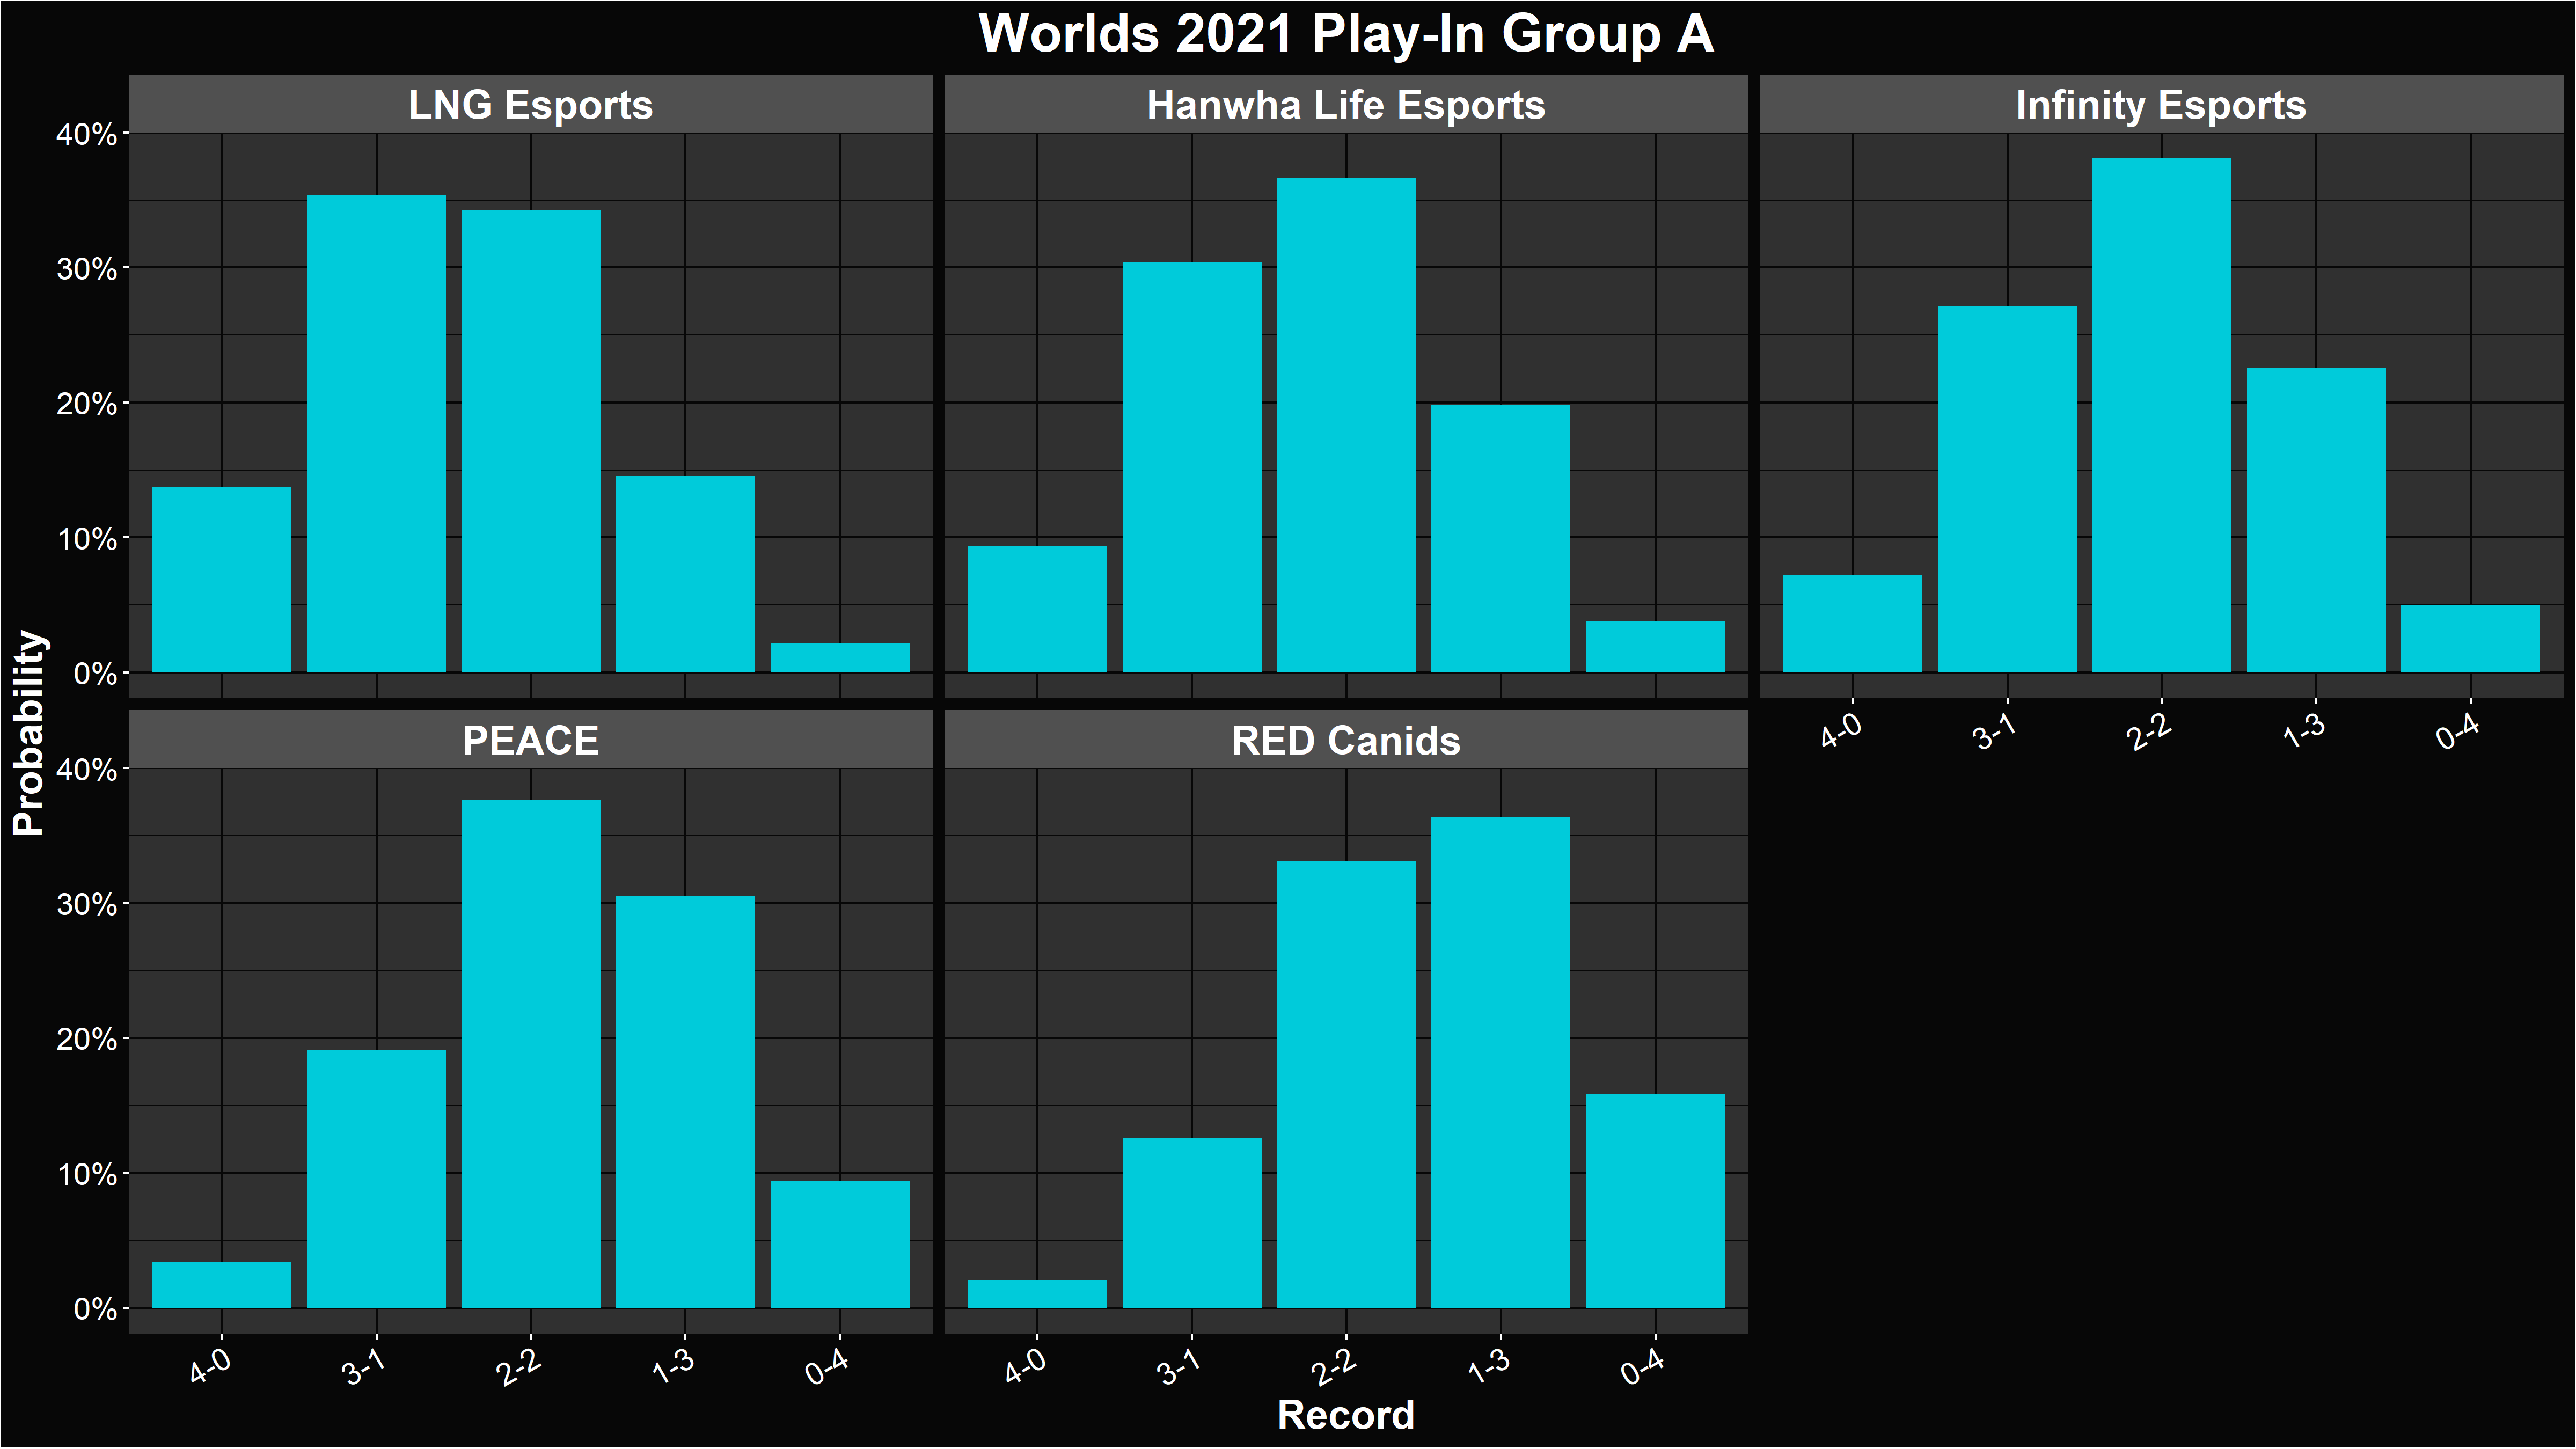 LoL Worlds 2021 Play-In Group A Record Distributions